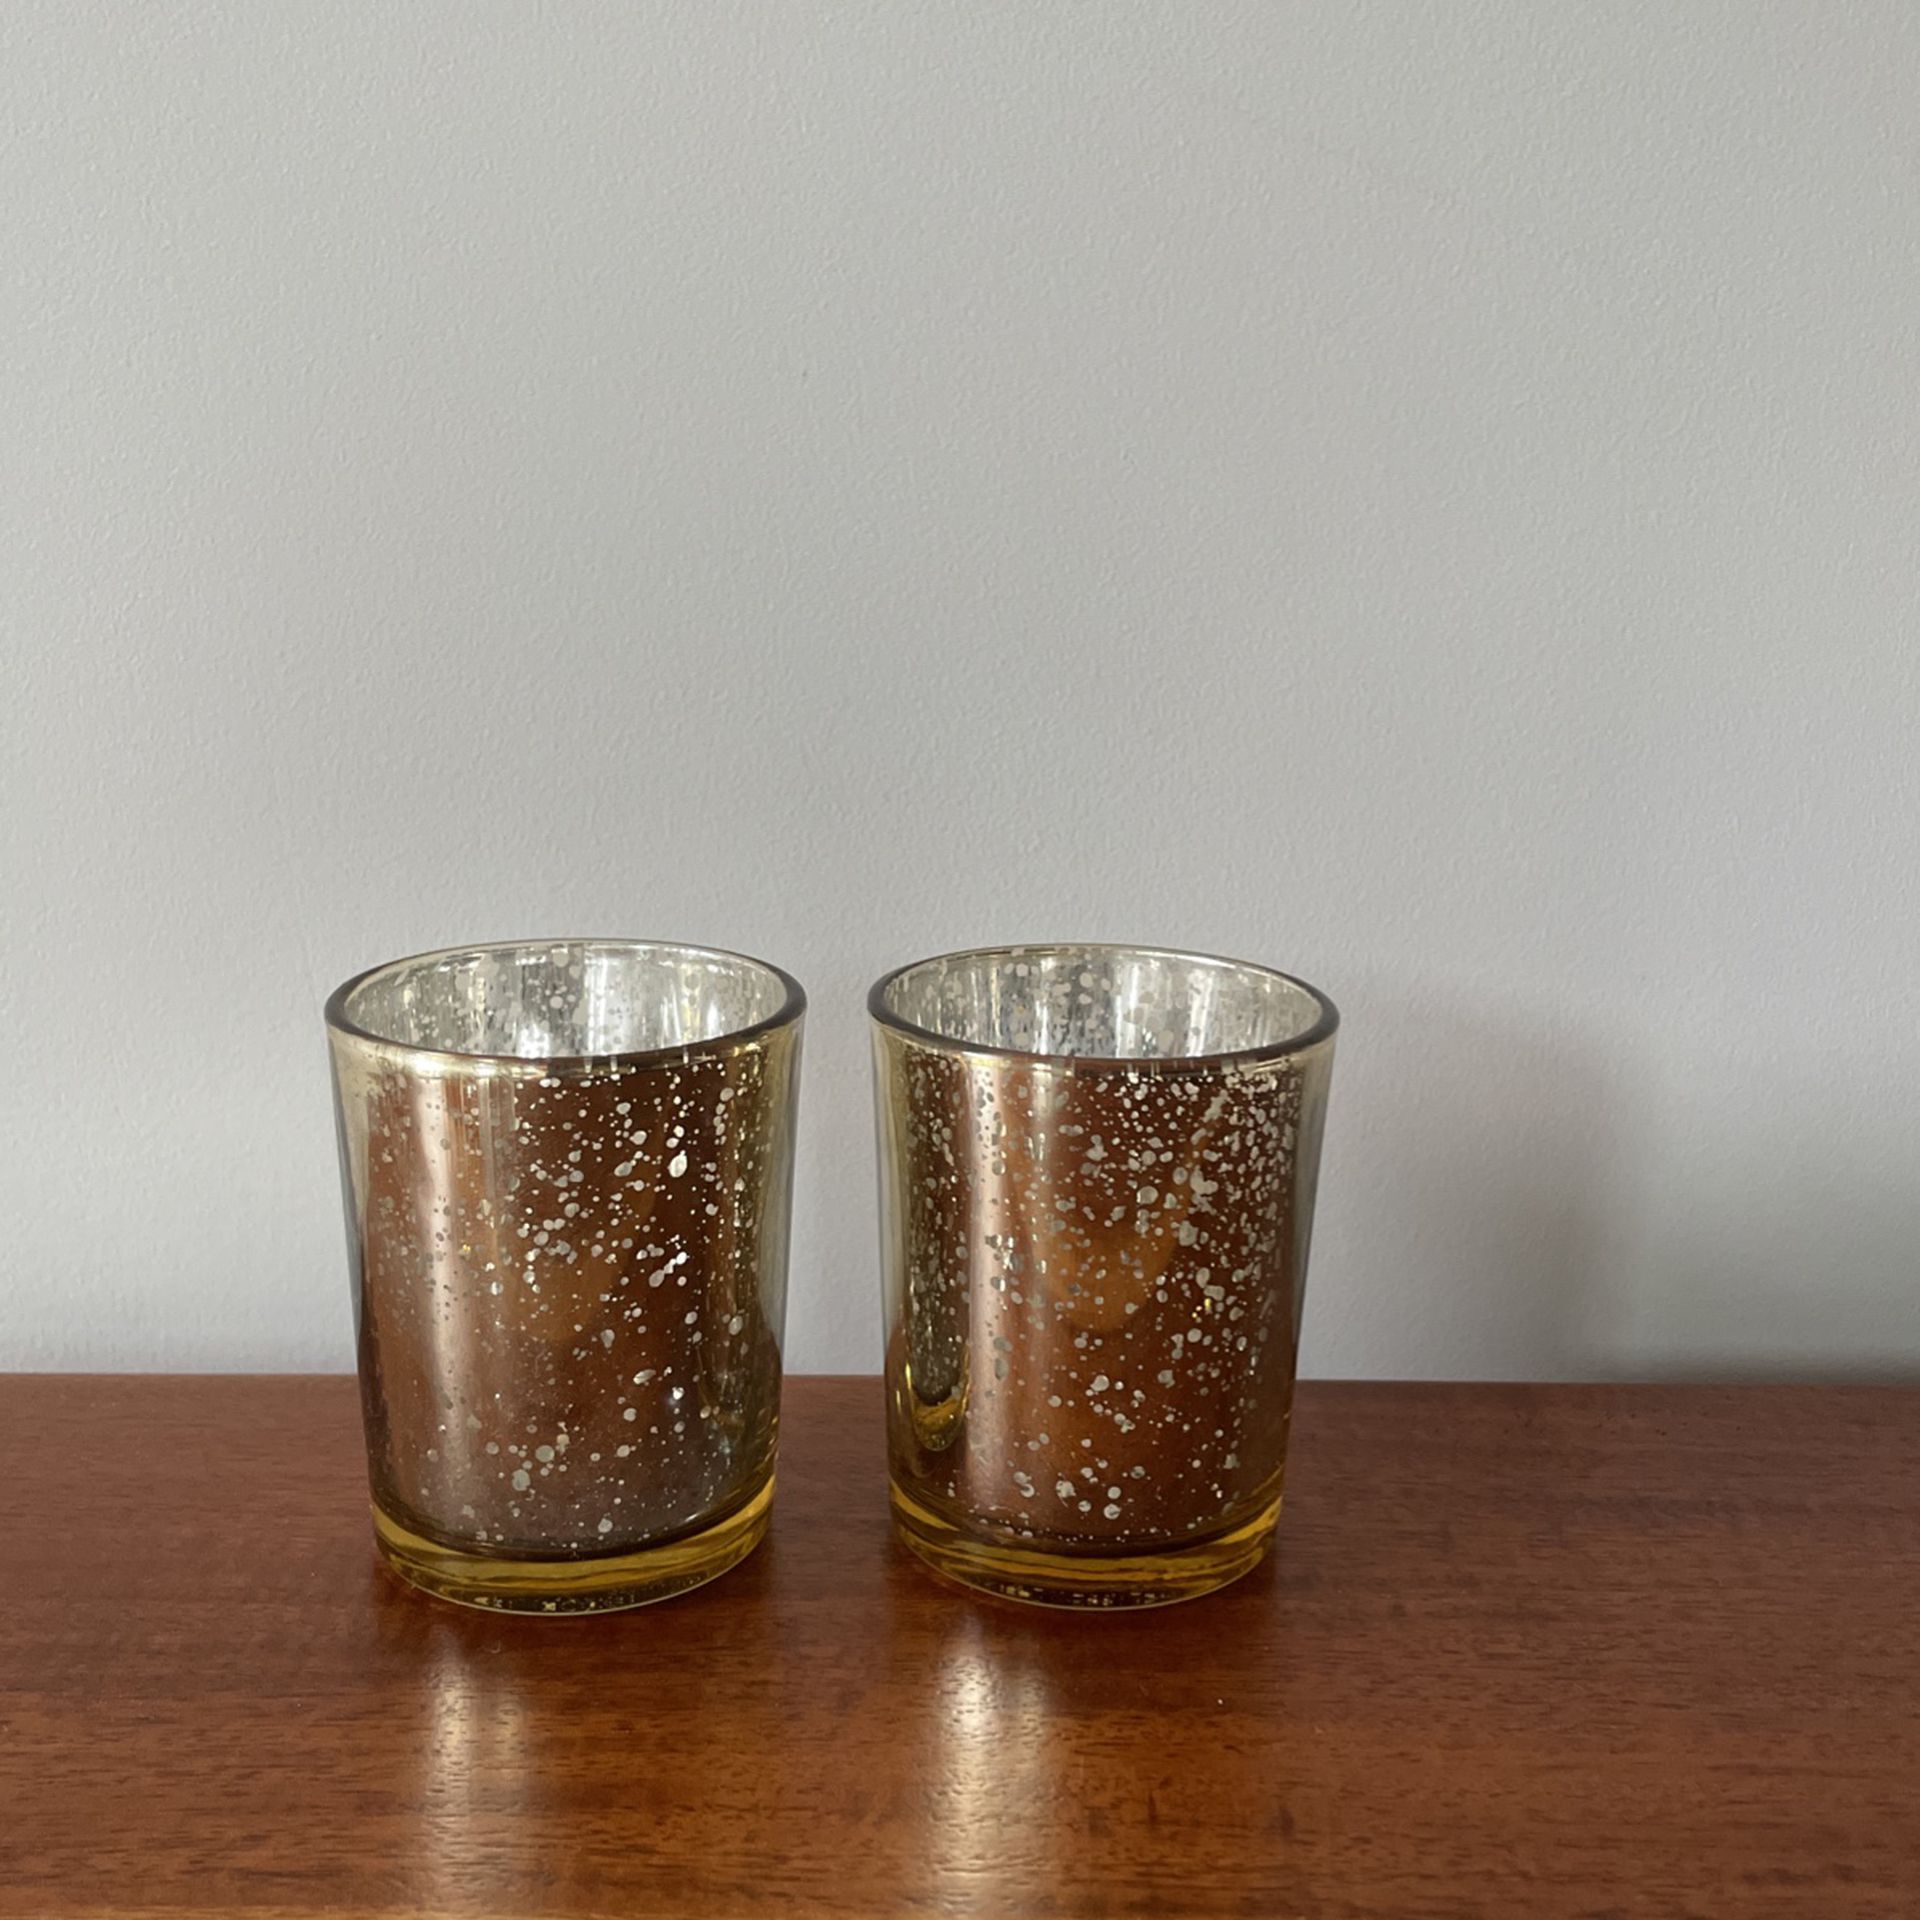 Gran & Rossi Gold Mercury Glass Votive Candle Holders - 14 ct 